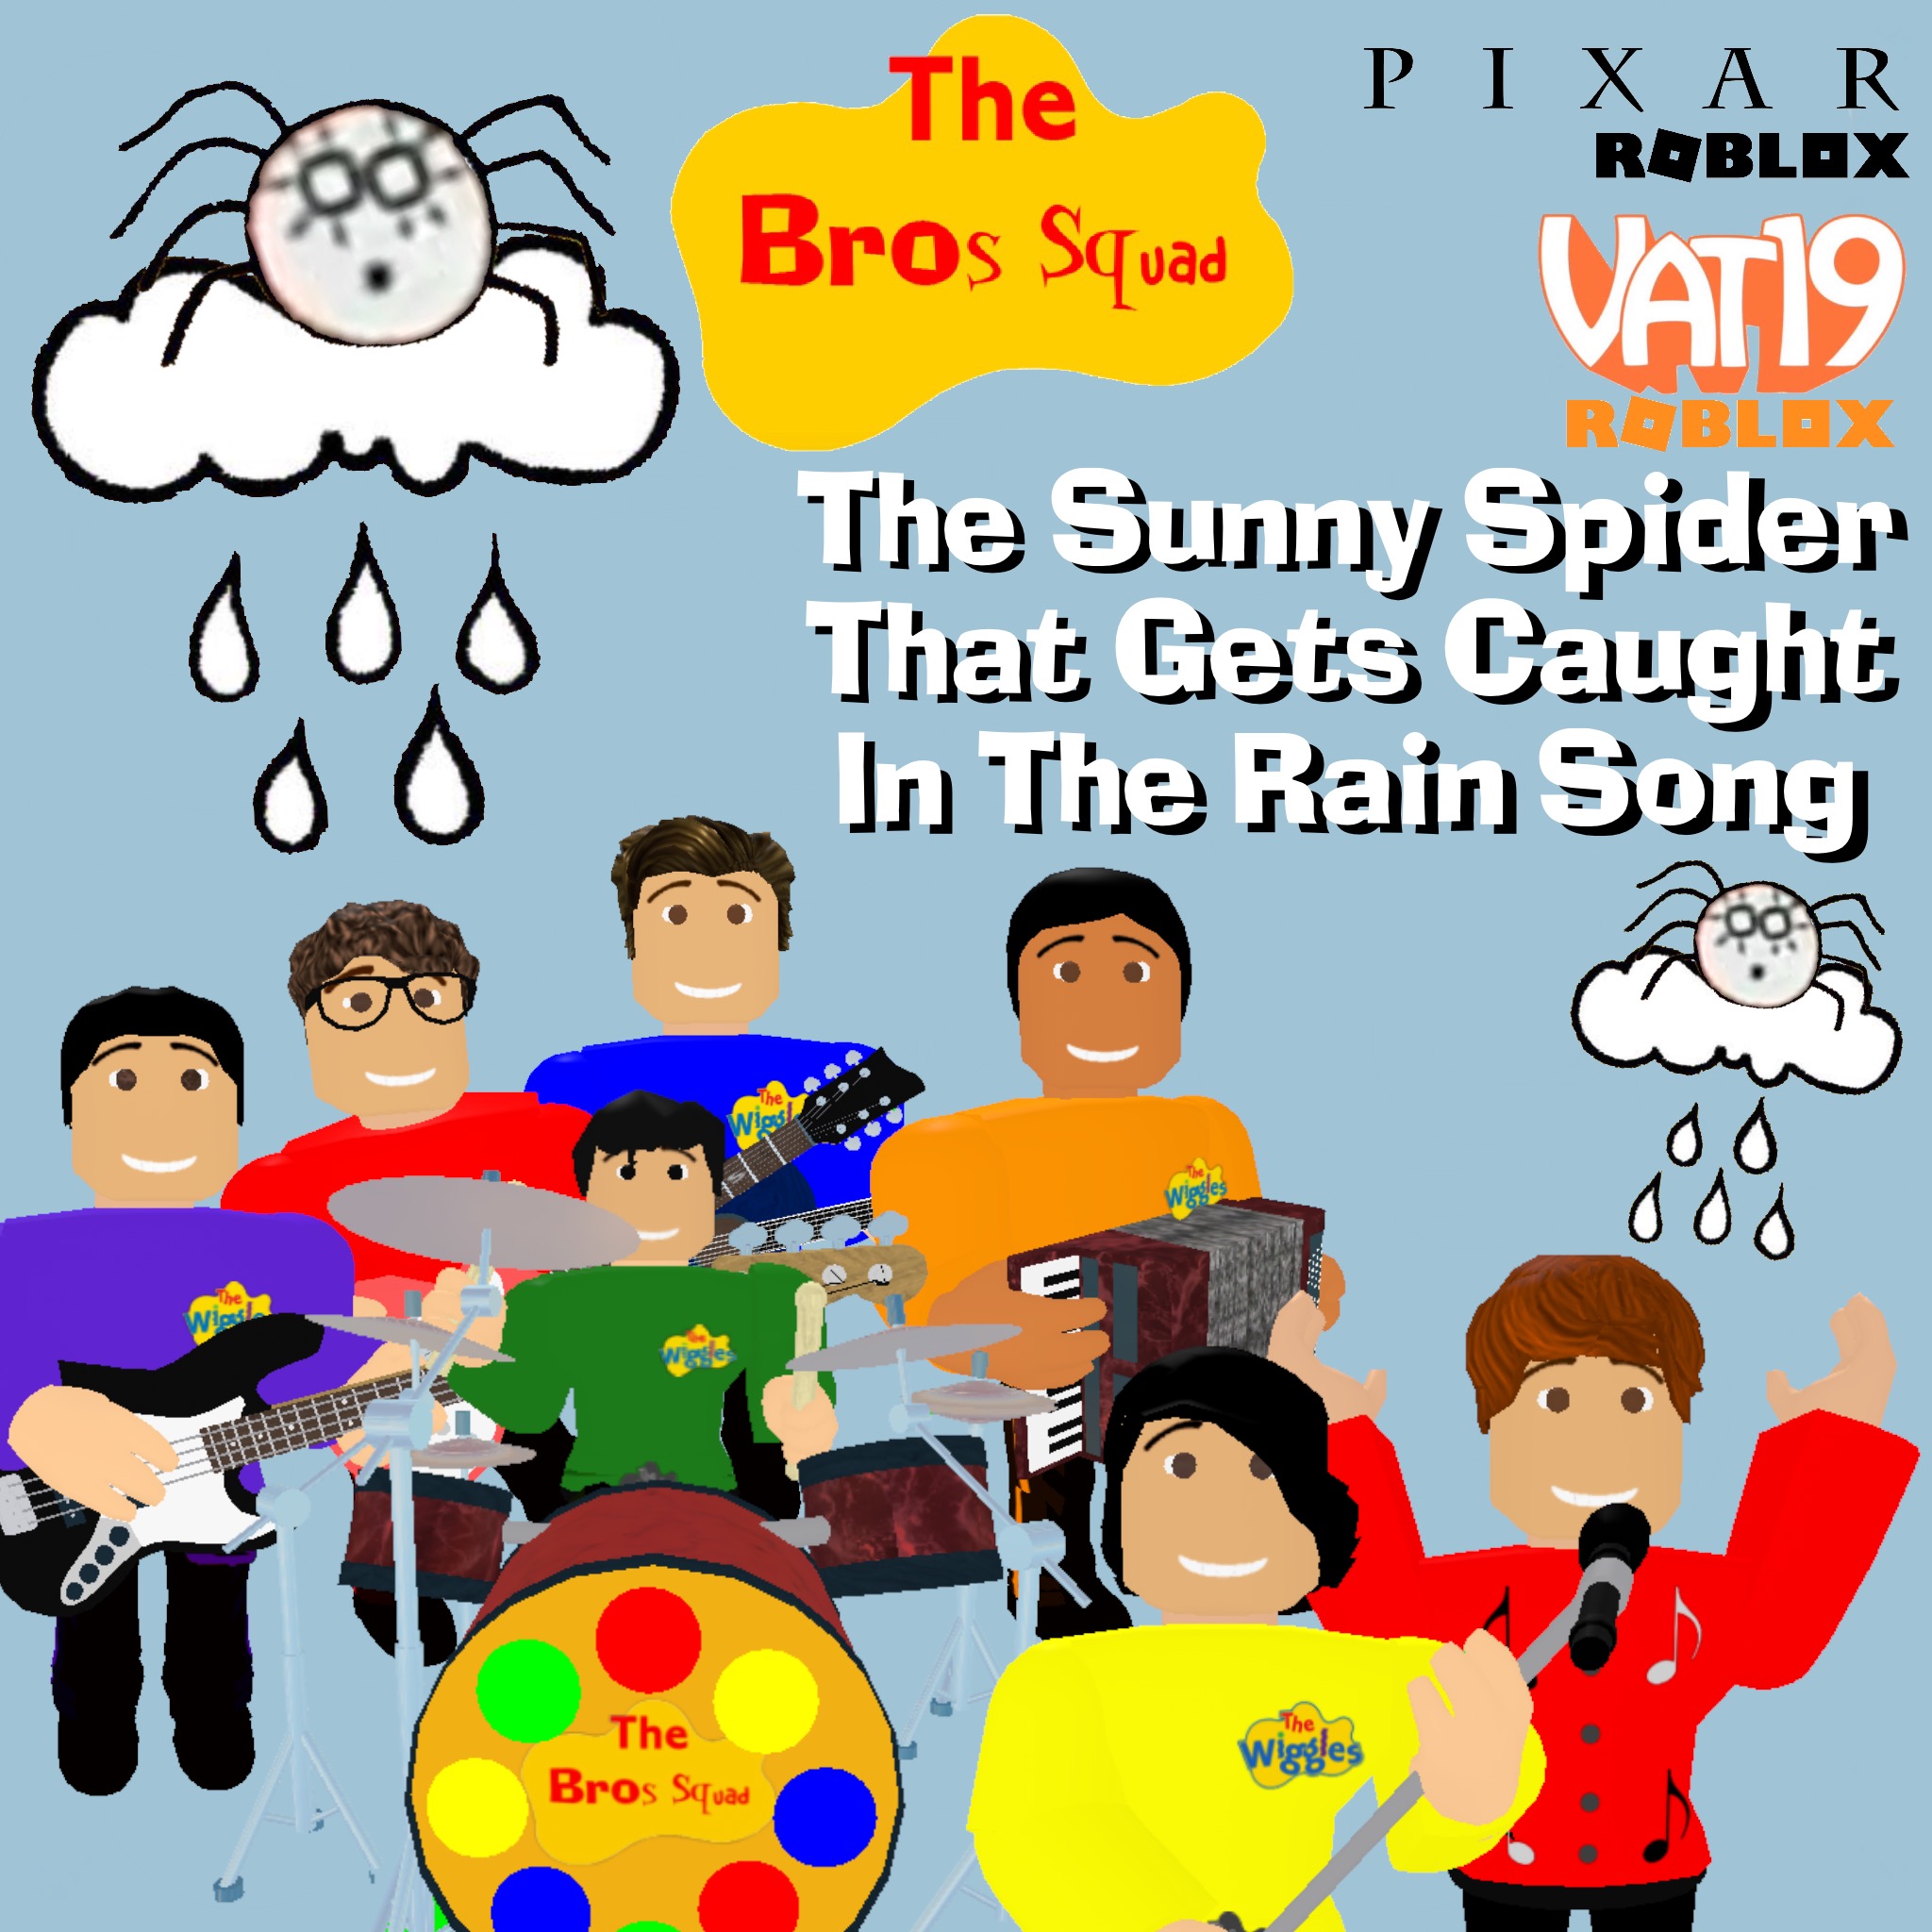 The Sunny Spider That Gets Caught In The Rain Song Song The Bros Squad Wiki Fandom - blues clues roblox game